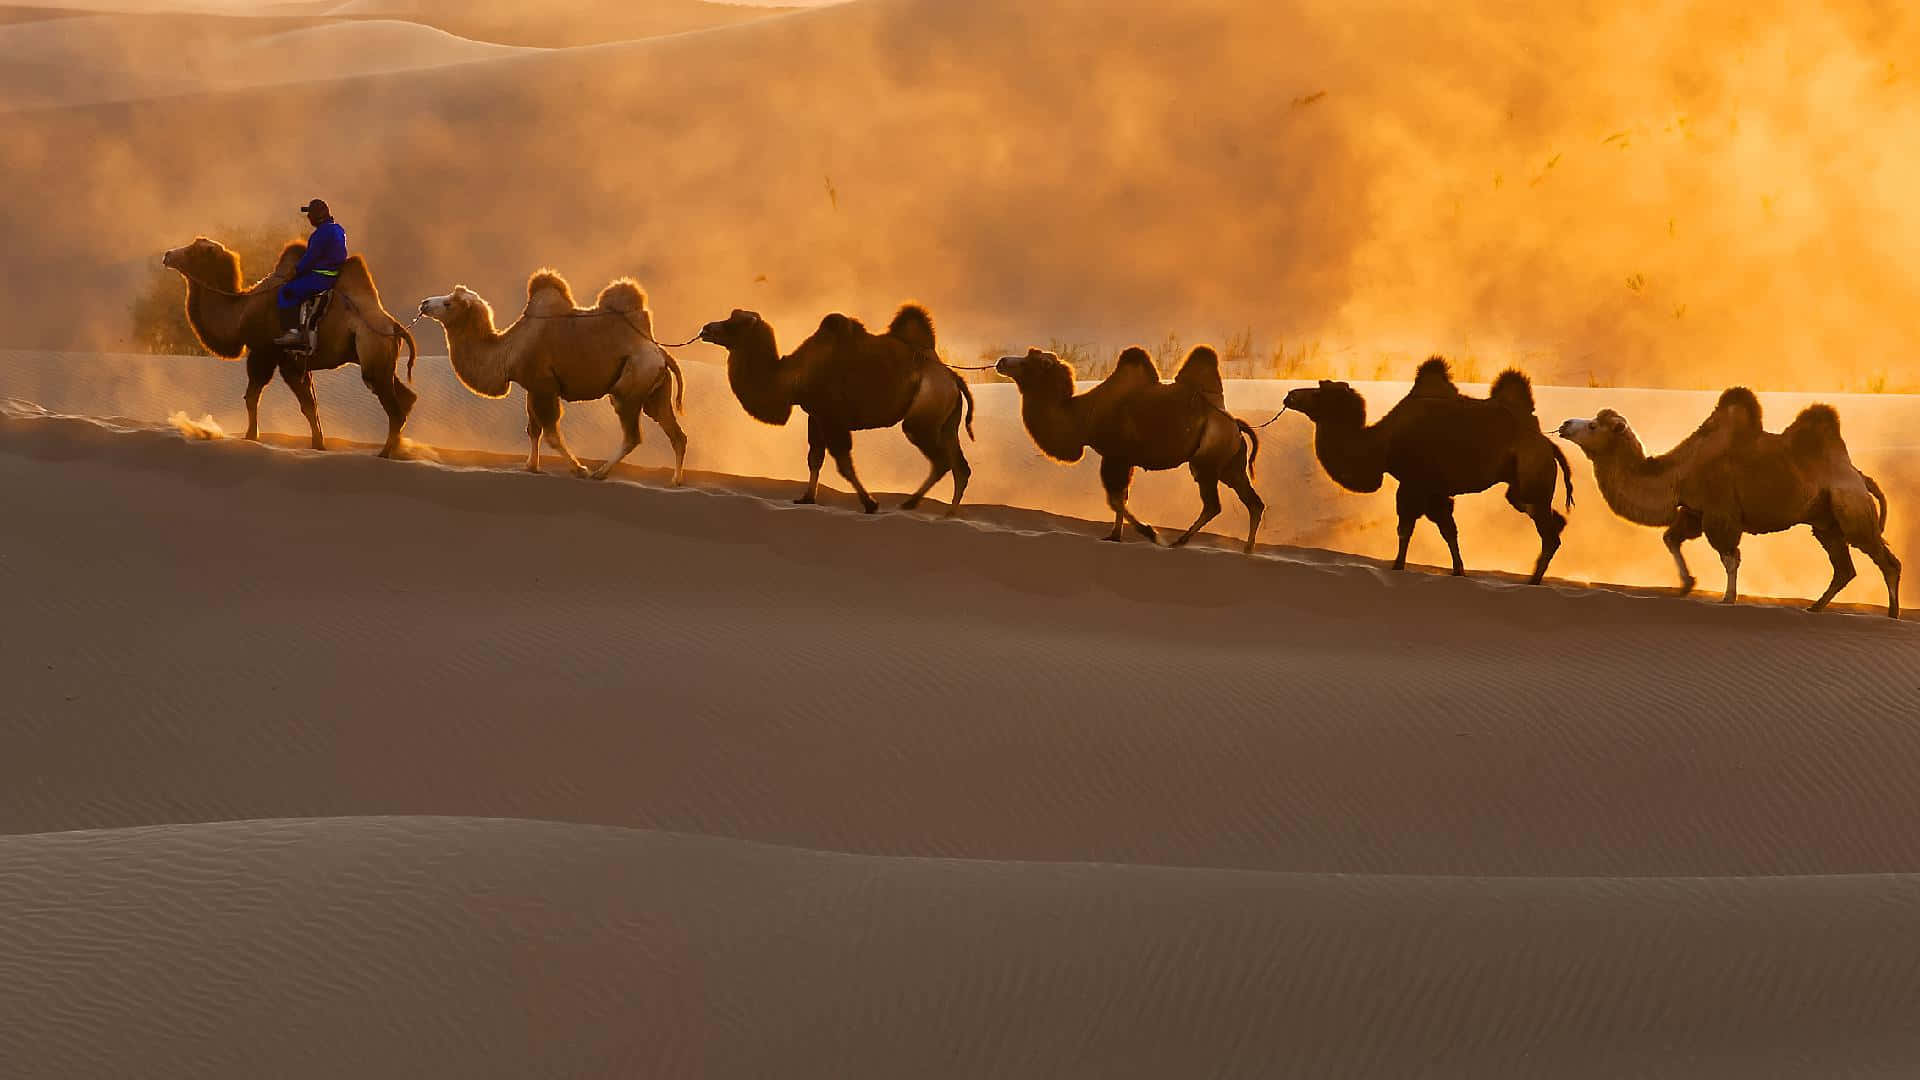 A Group Of Camels Are Riding Through The Desert